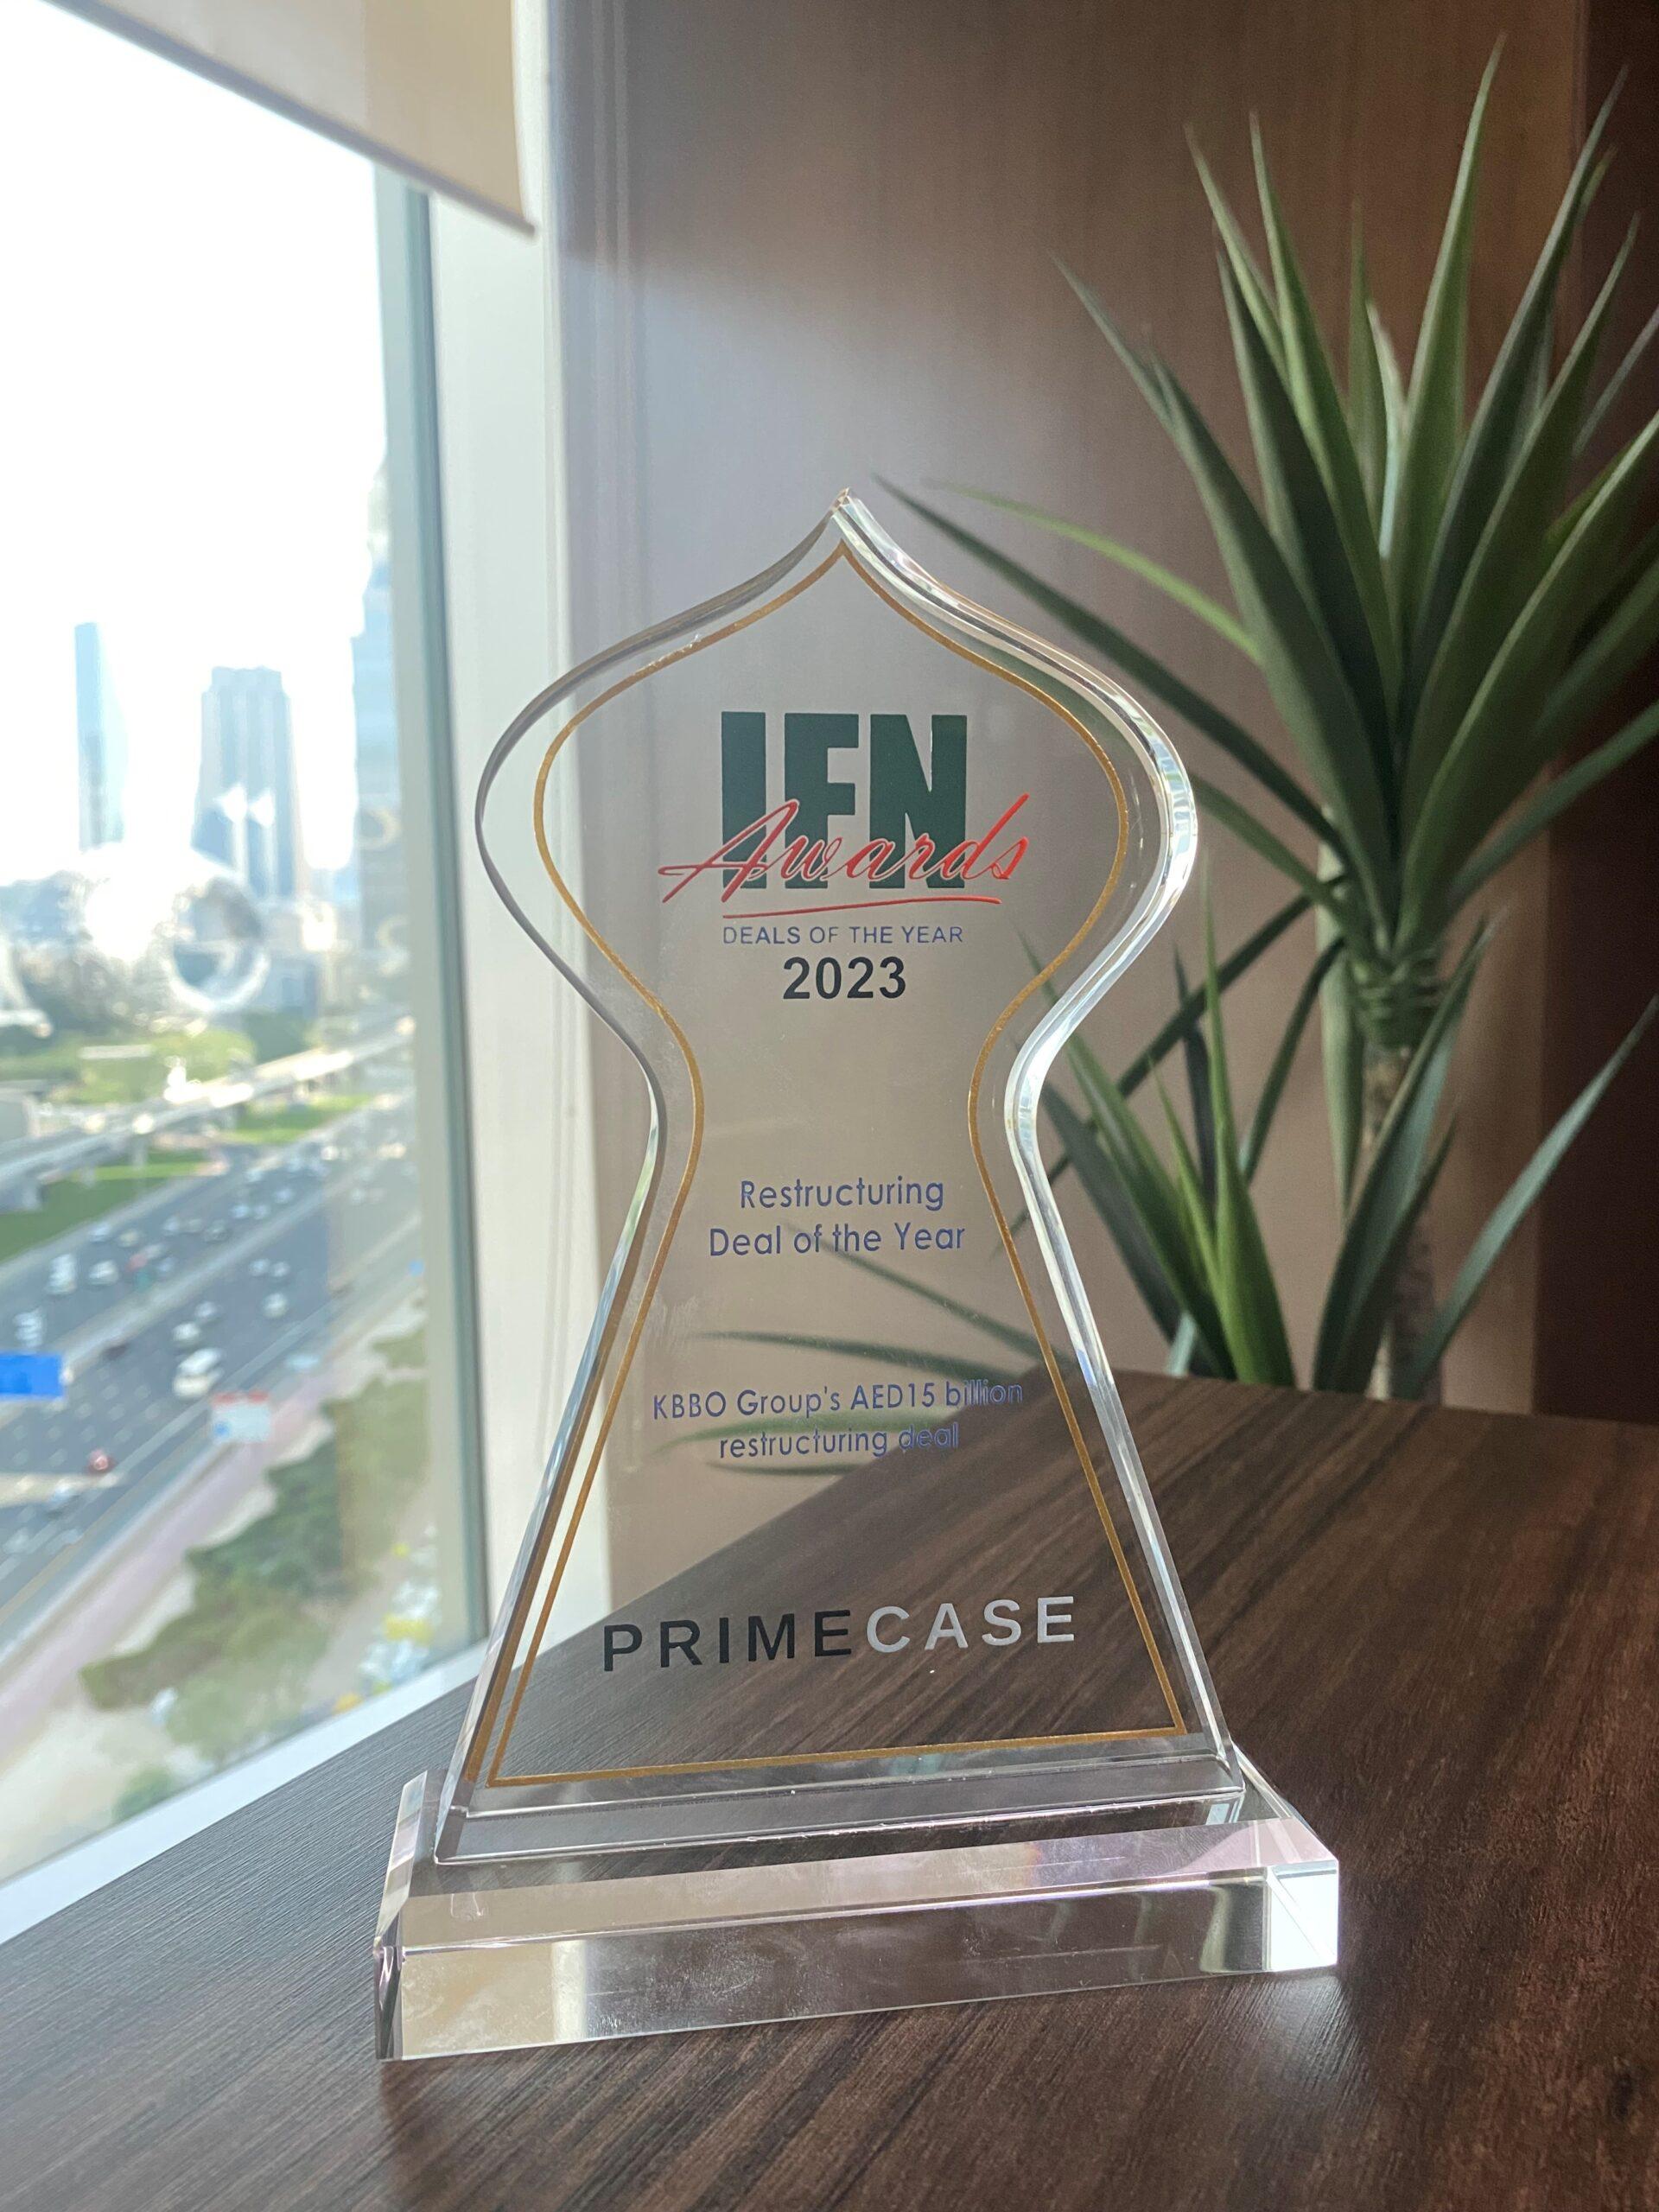 IFN AWARDS &#8211; DEALS OF THE YEAR 2023